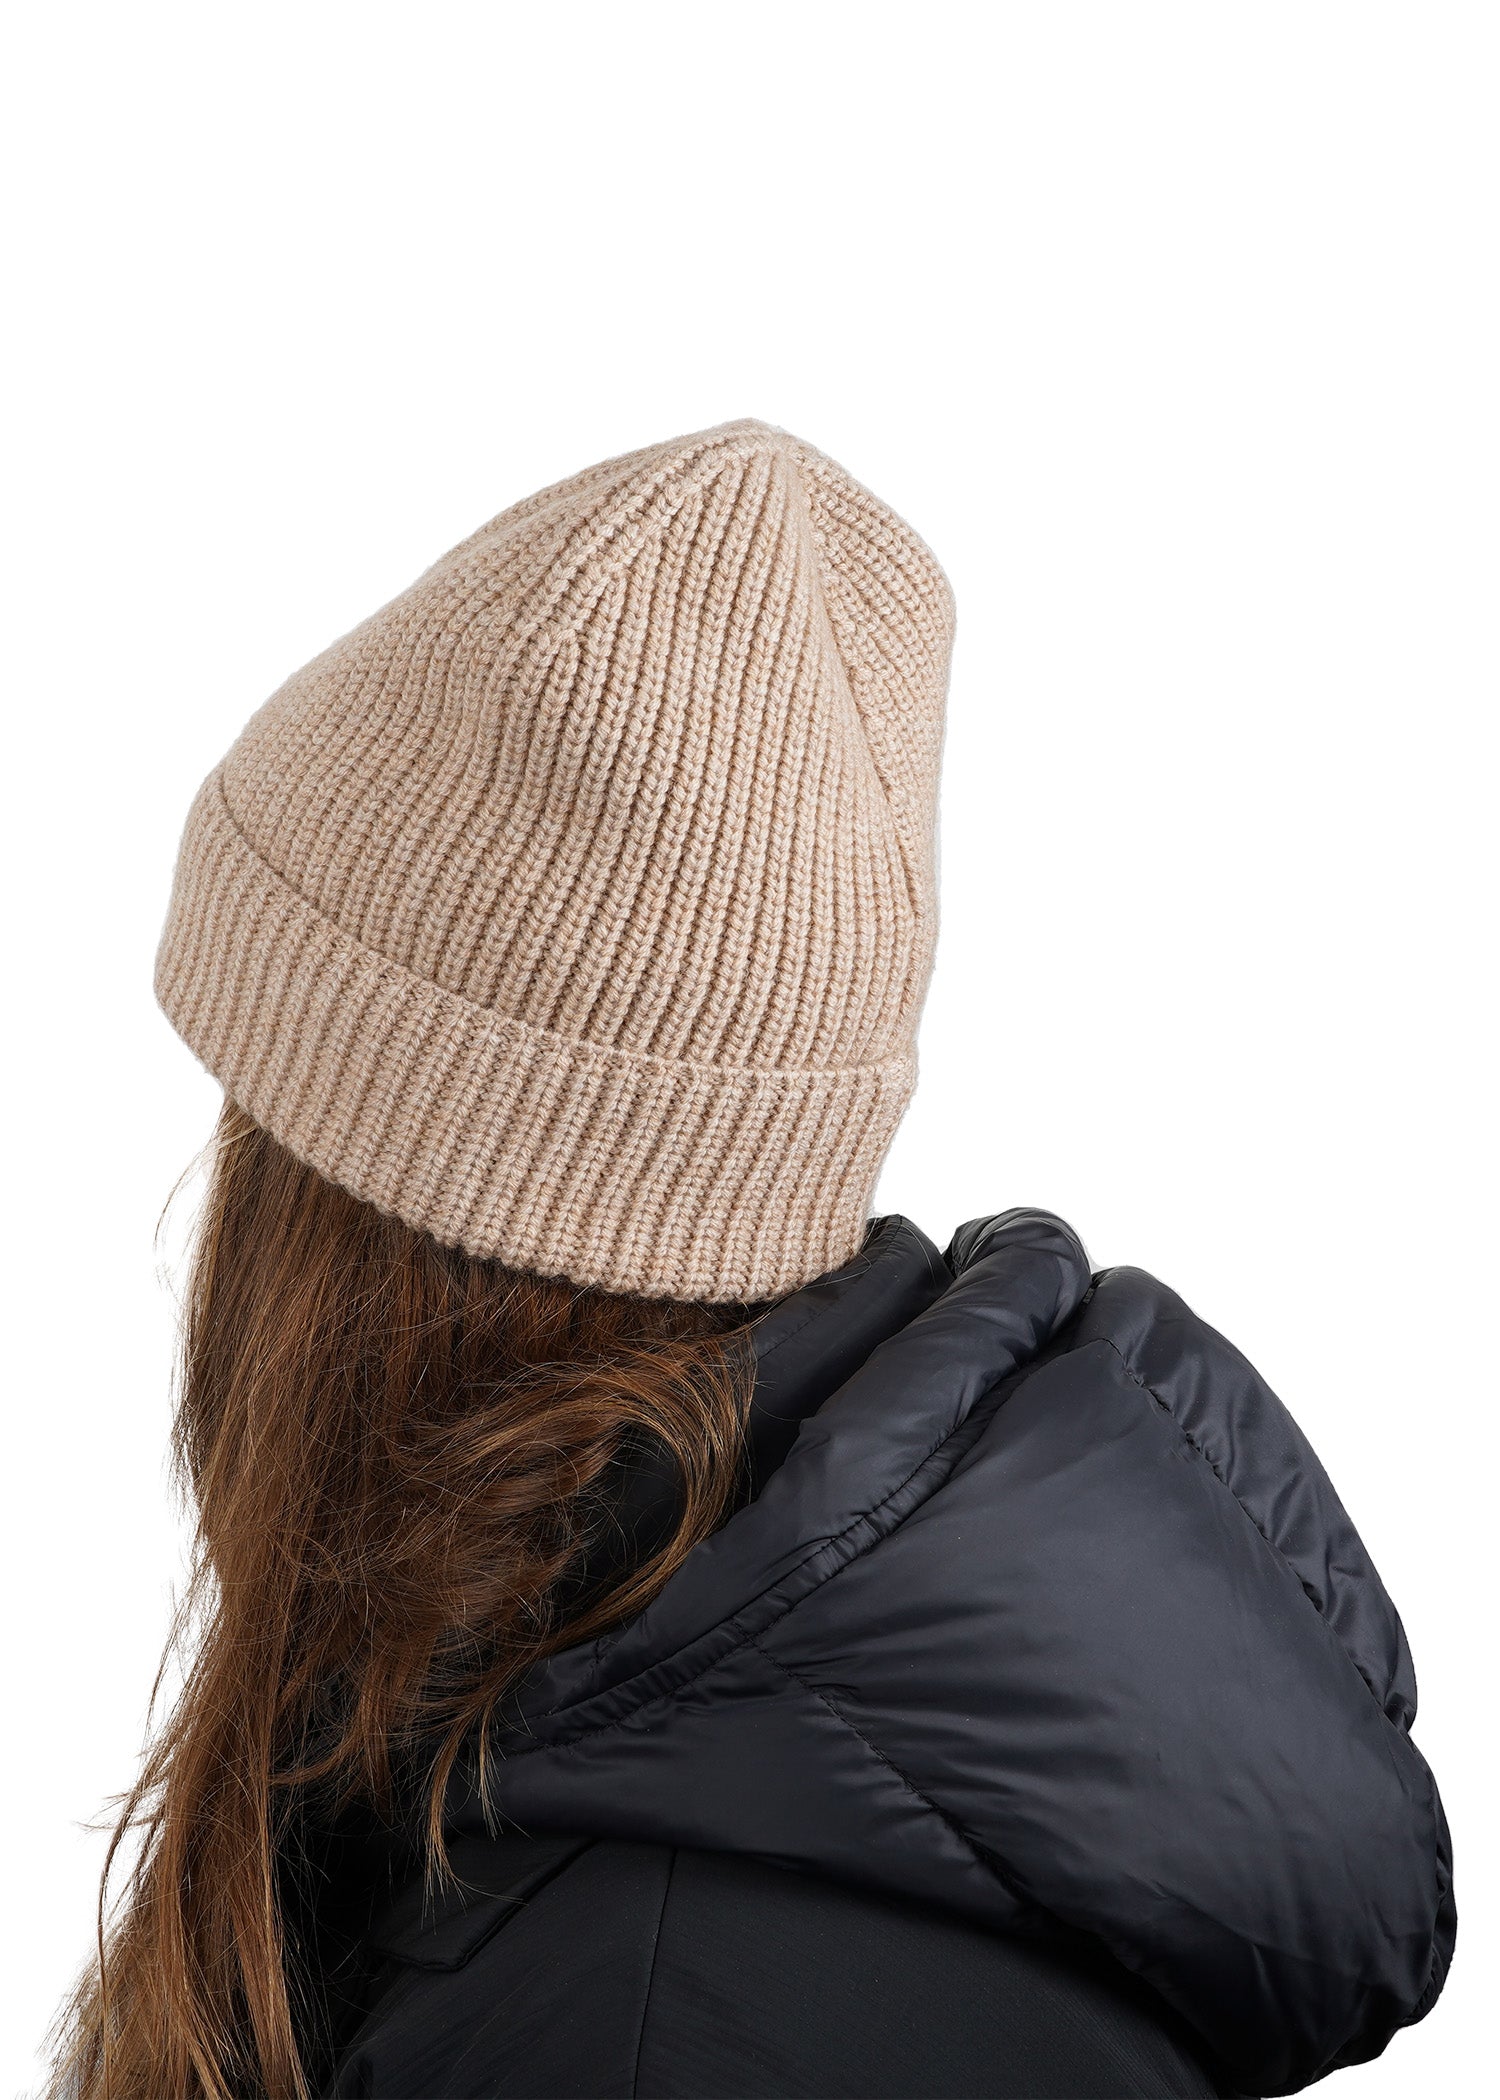 Crafted from a blend of 70% fine wool and 30% cashmere, this beanie is the perfect marriage of warmth and luxury. Its sumptuously soft texture and exquisite craftsmanship make it a must-have accessory for any fashion-forward individual.  The Muttler Beanie not only keeps you cozy but also adds a touch of elegance to your outfit. Its fine wool and cashmere blend create a beautifully soft and comfortable hat that's as stylish as it is warm.